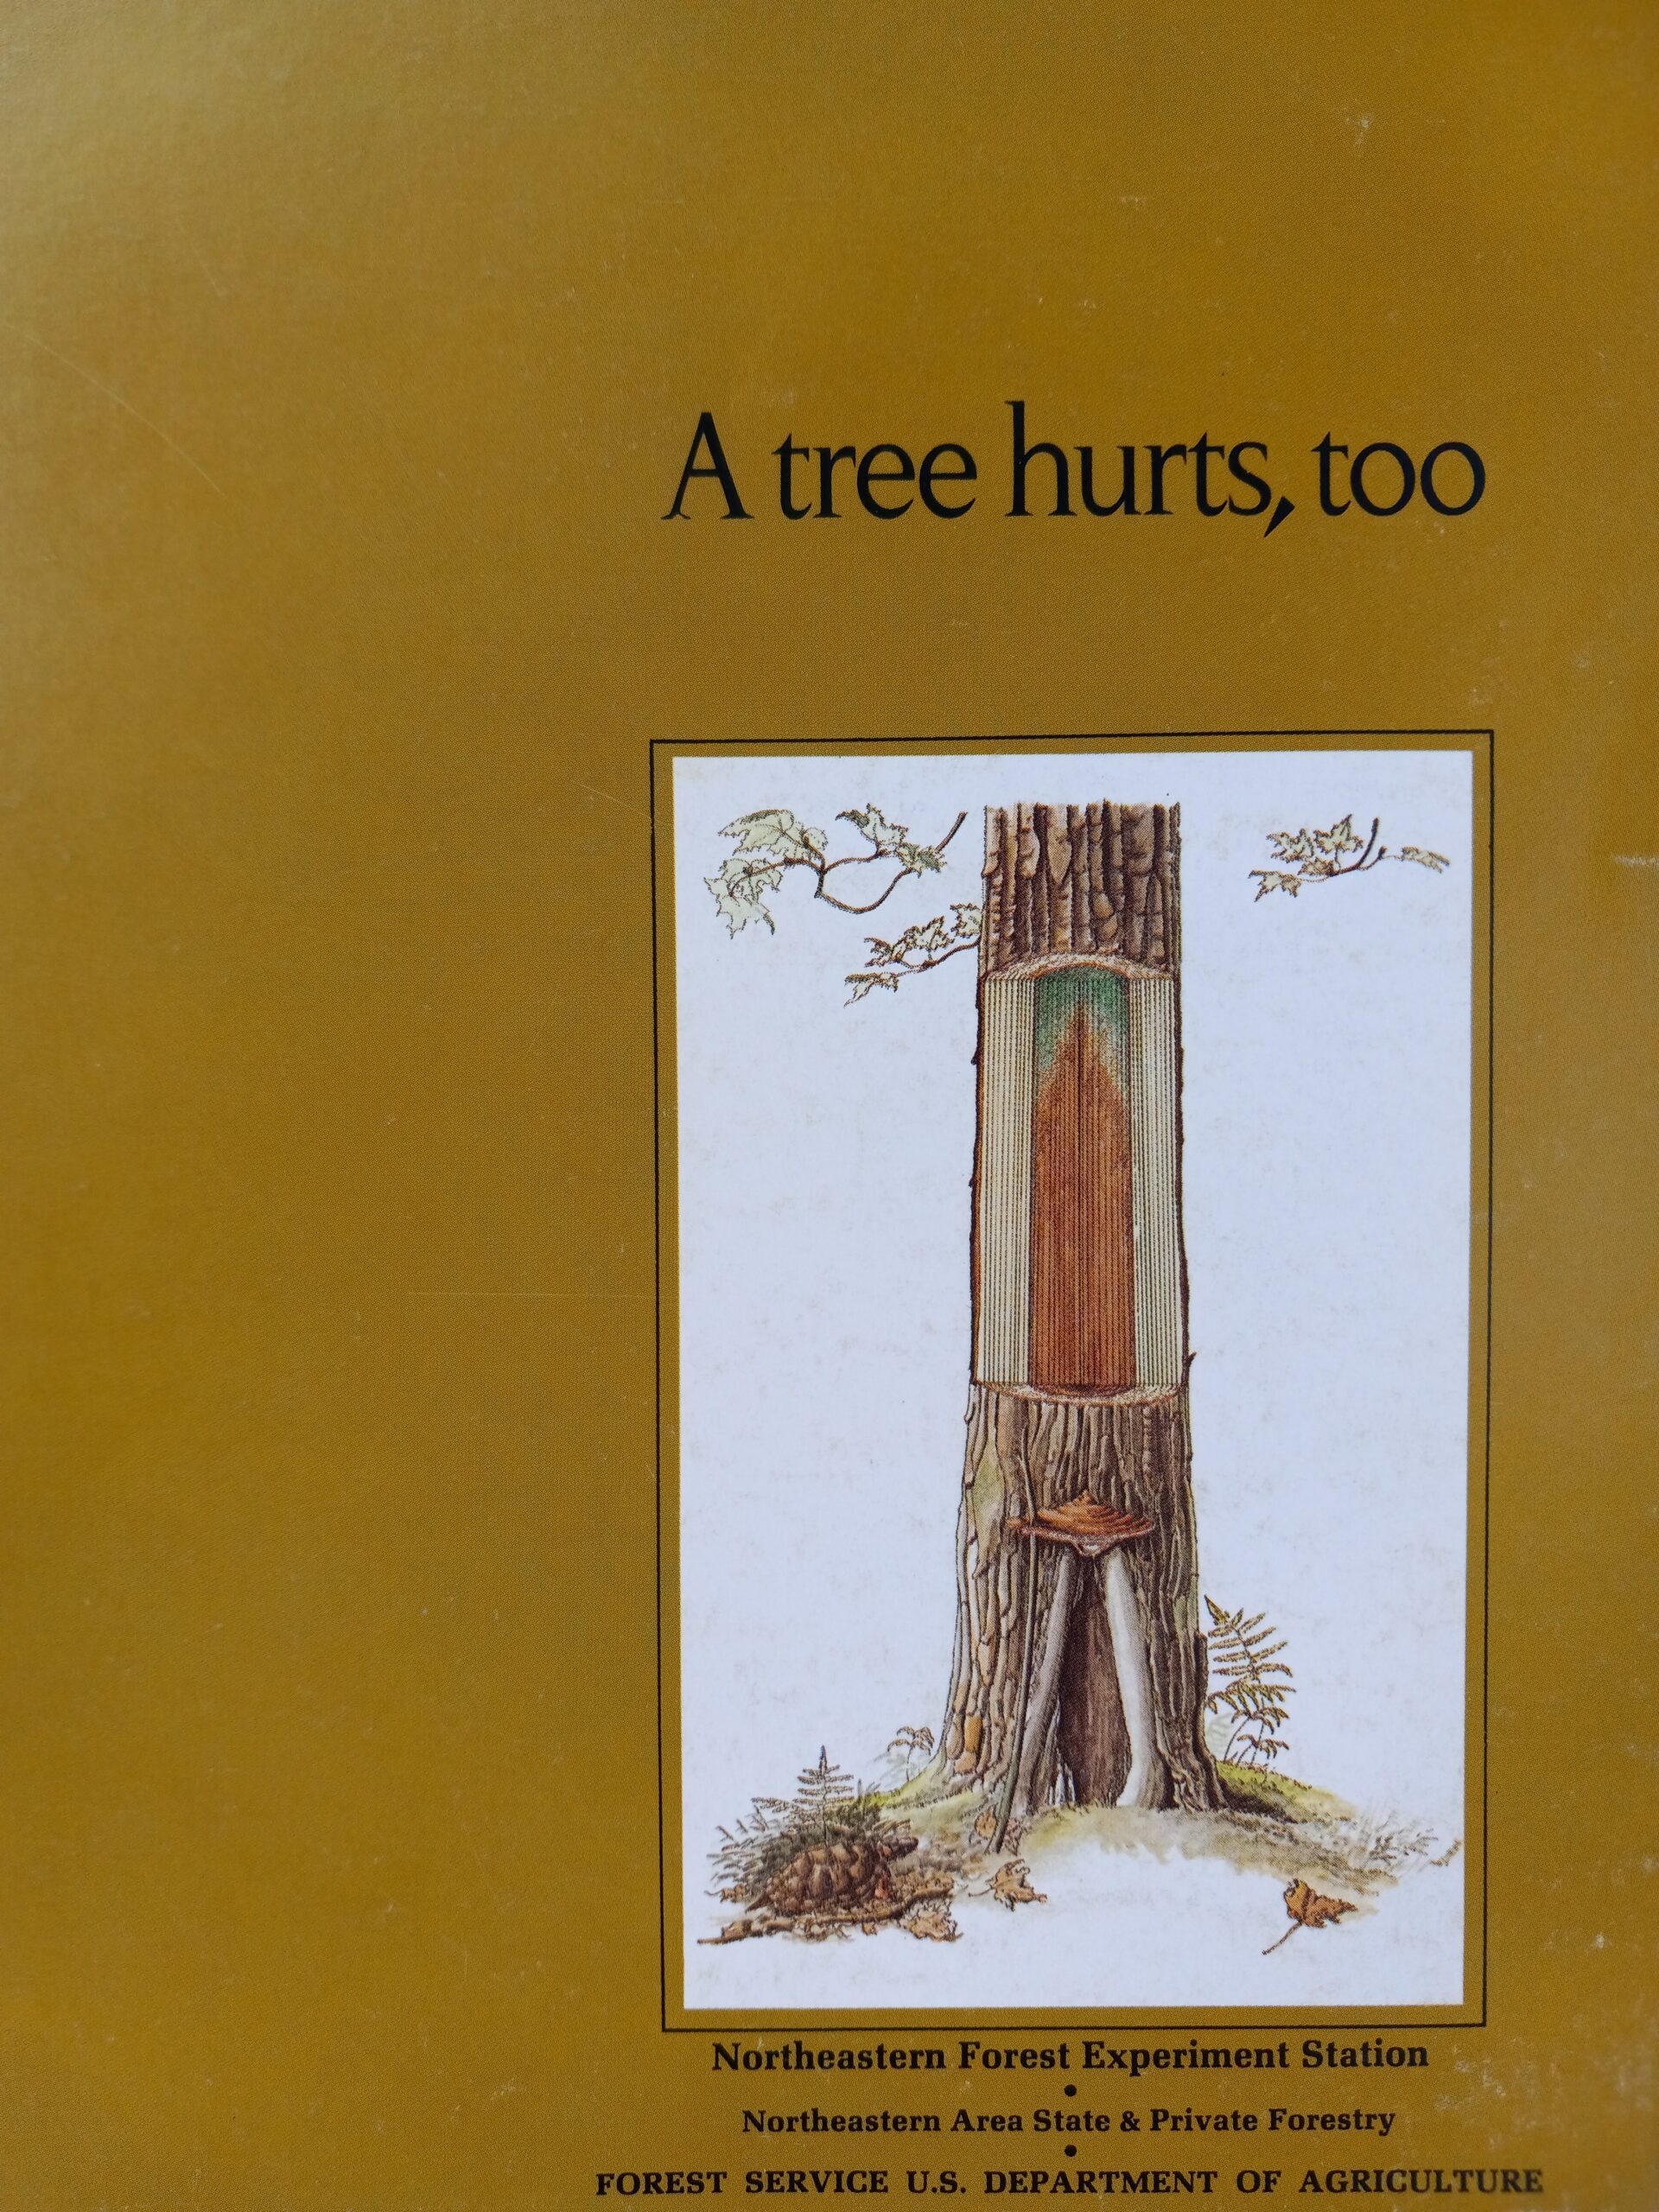 Drawing of inside of tree beneath a title "A tree hurst, too" publication cover.